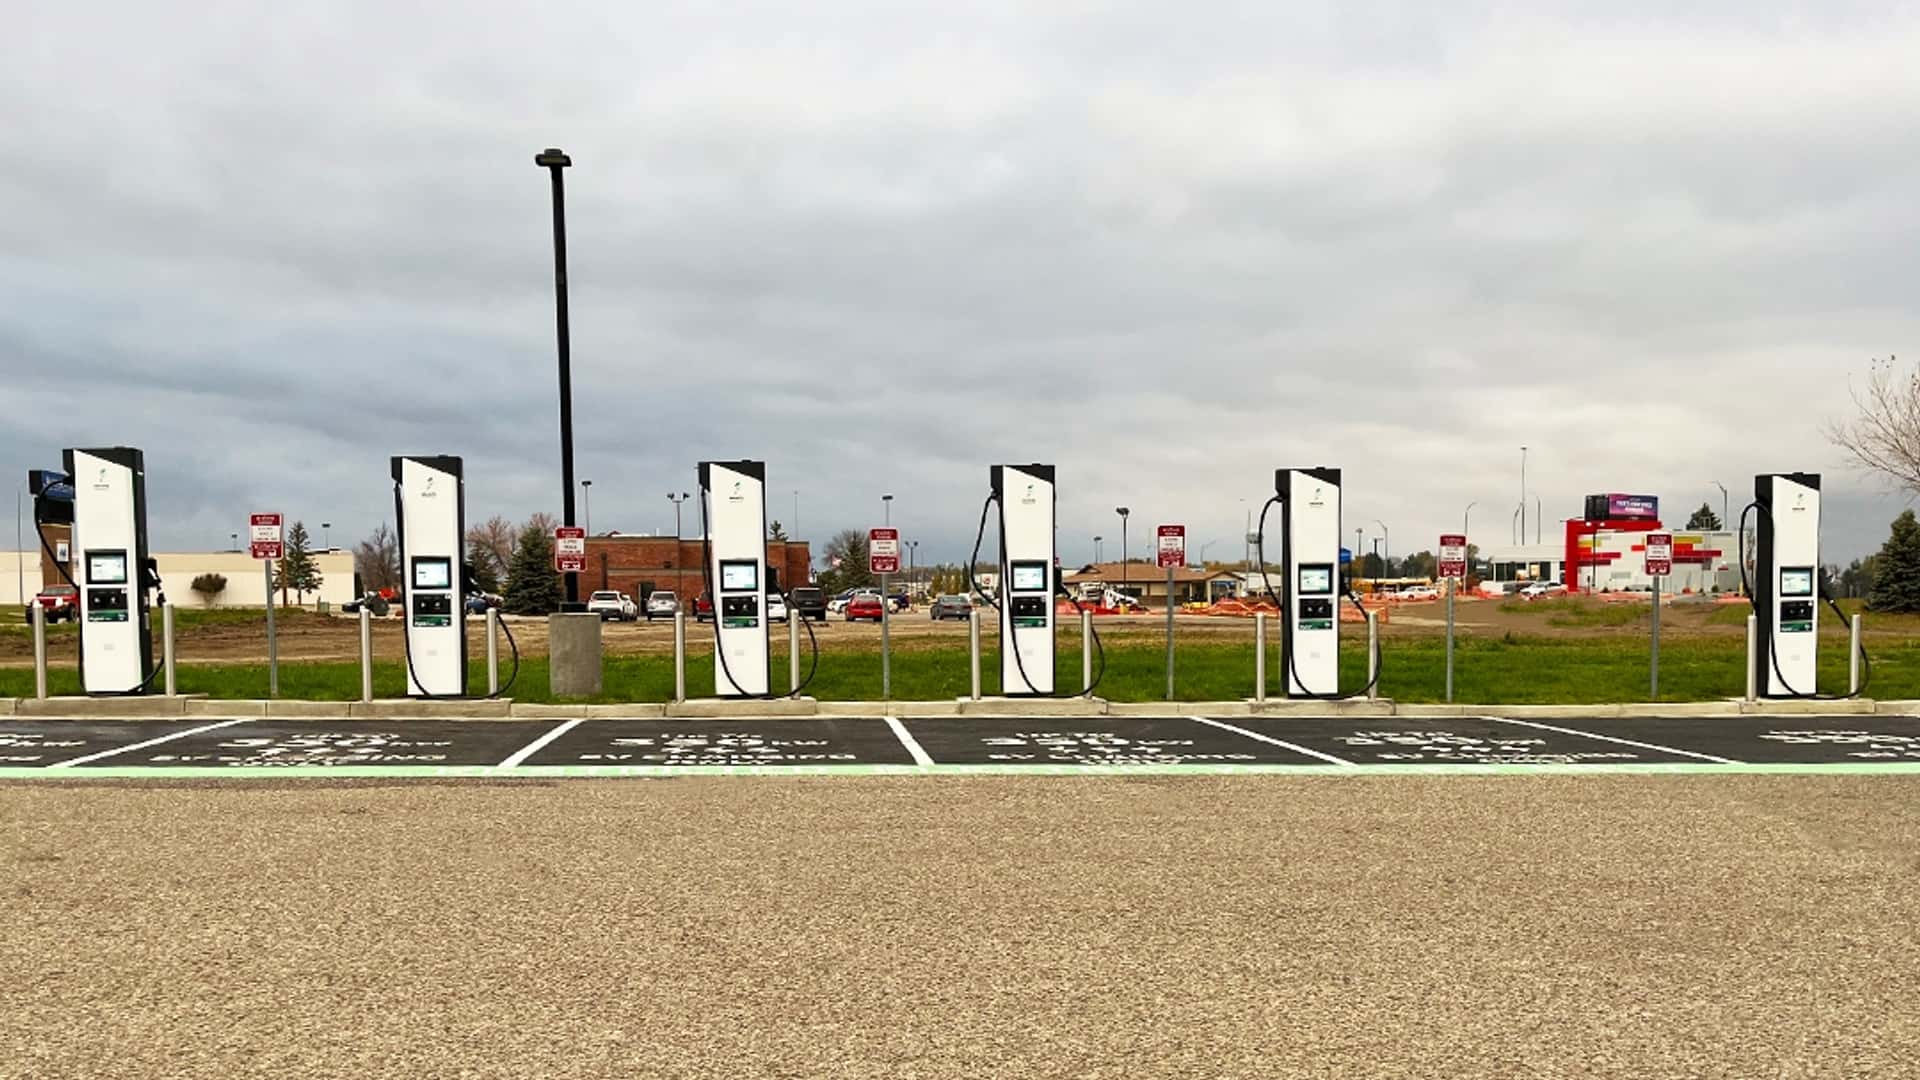 electrify america opens its first station in north dakota to fill the void